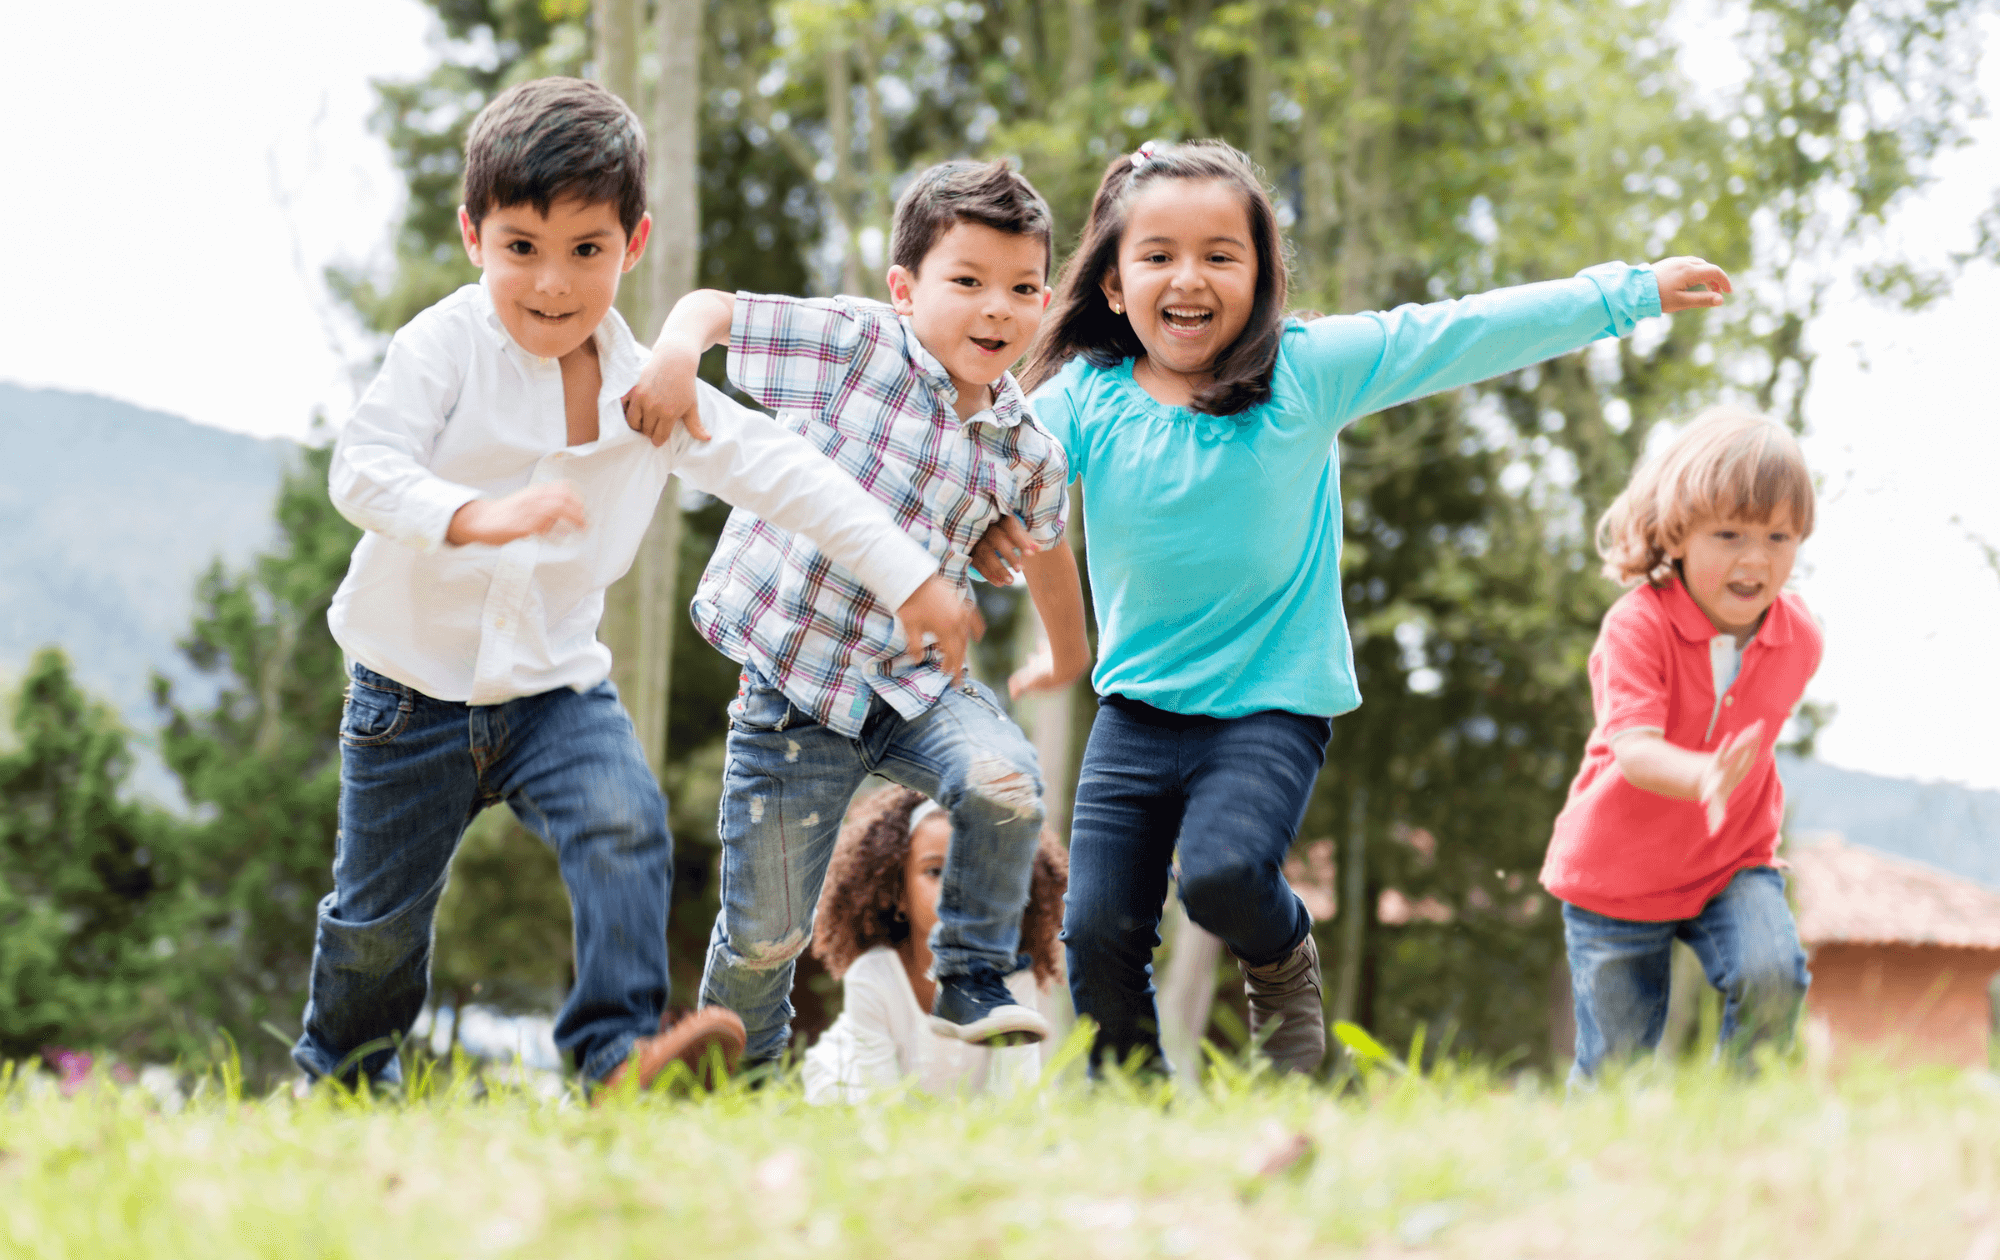 Play helps with a child's physical fitness